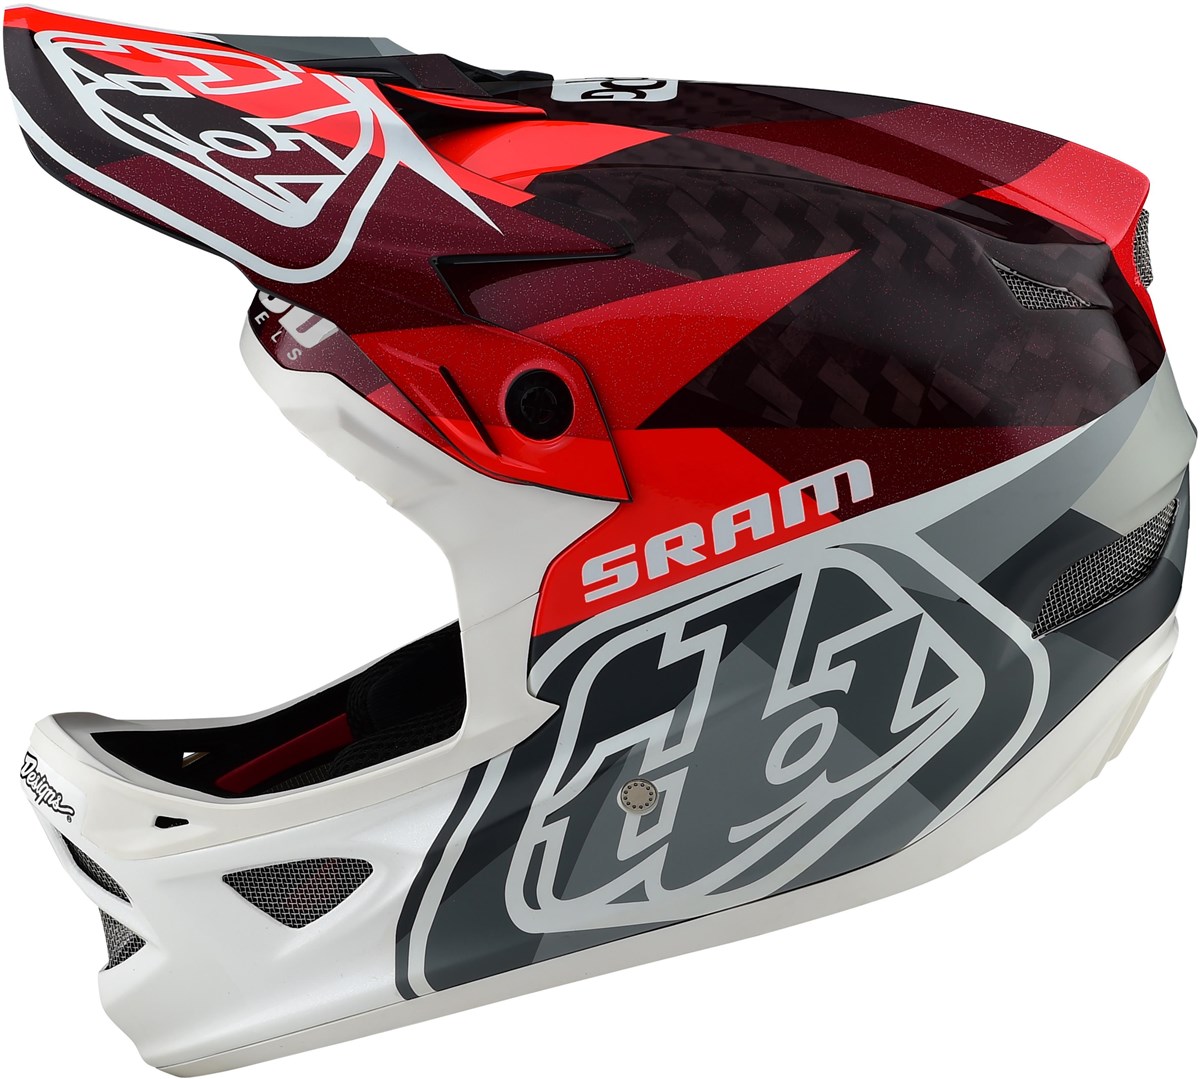 Troy Lee Designs D3 Carbon Mips Limited Edition Full Face Helmet product image